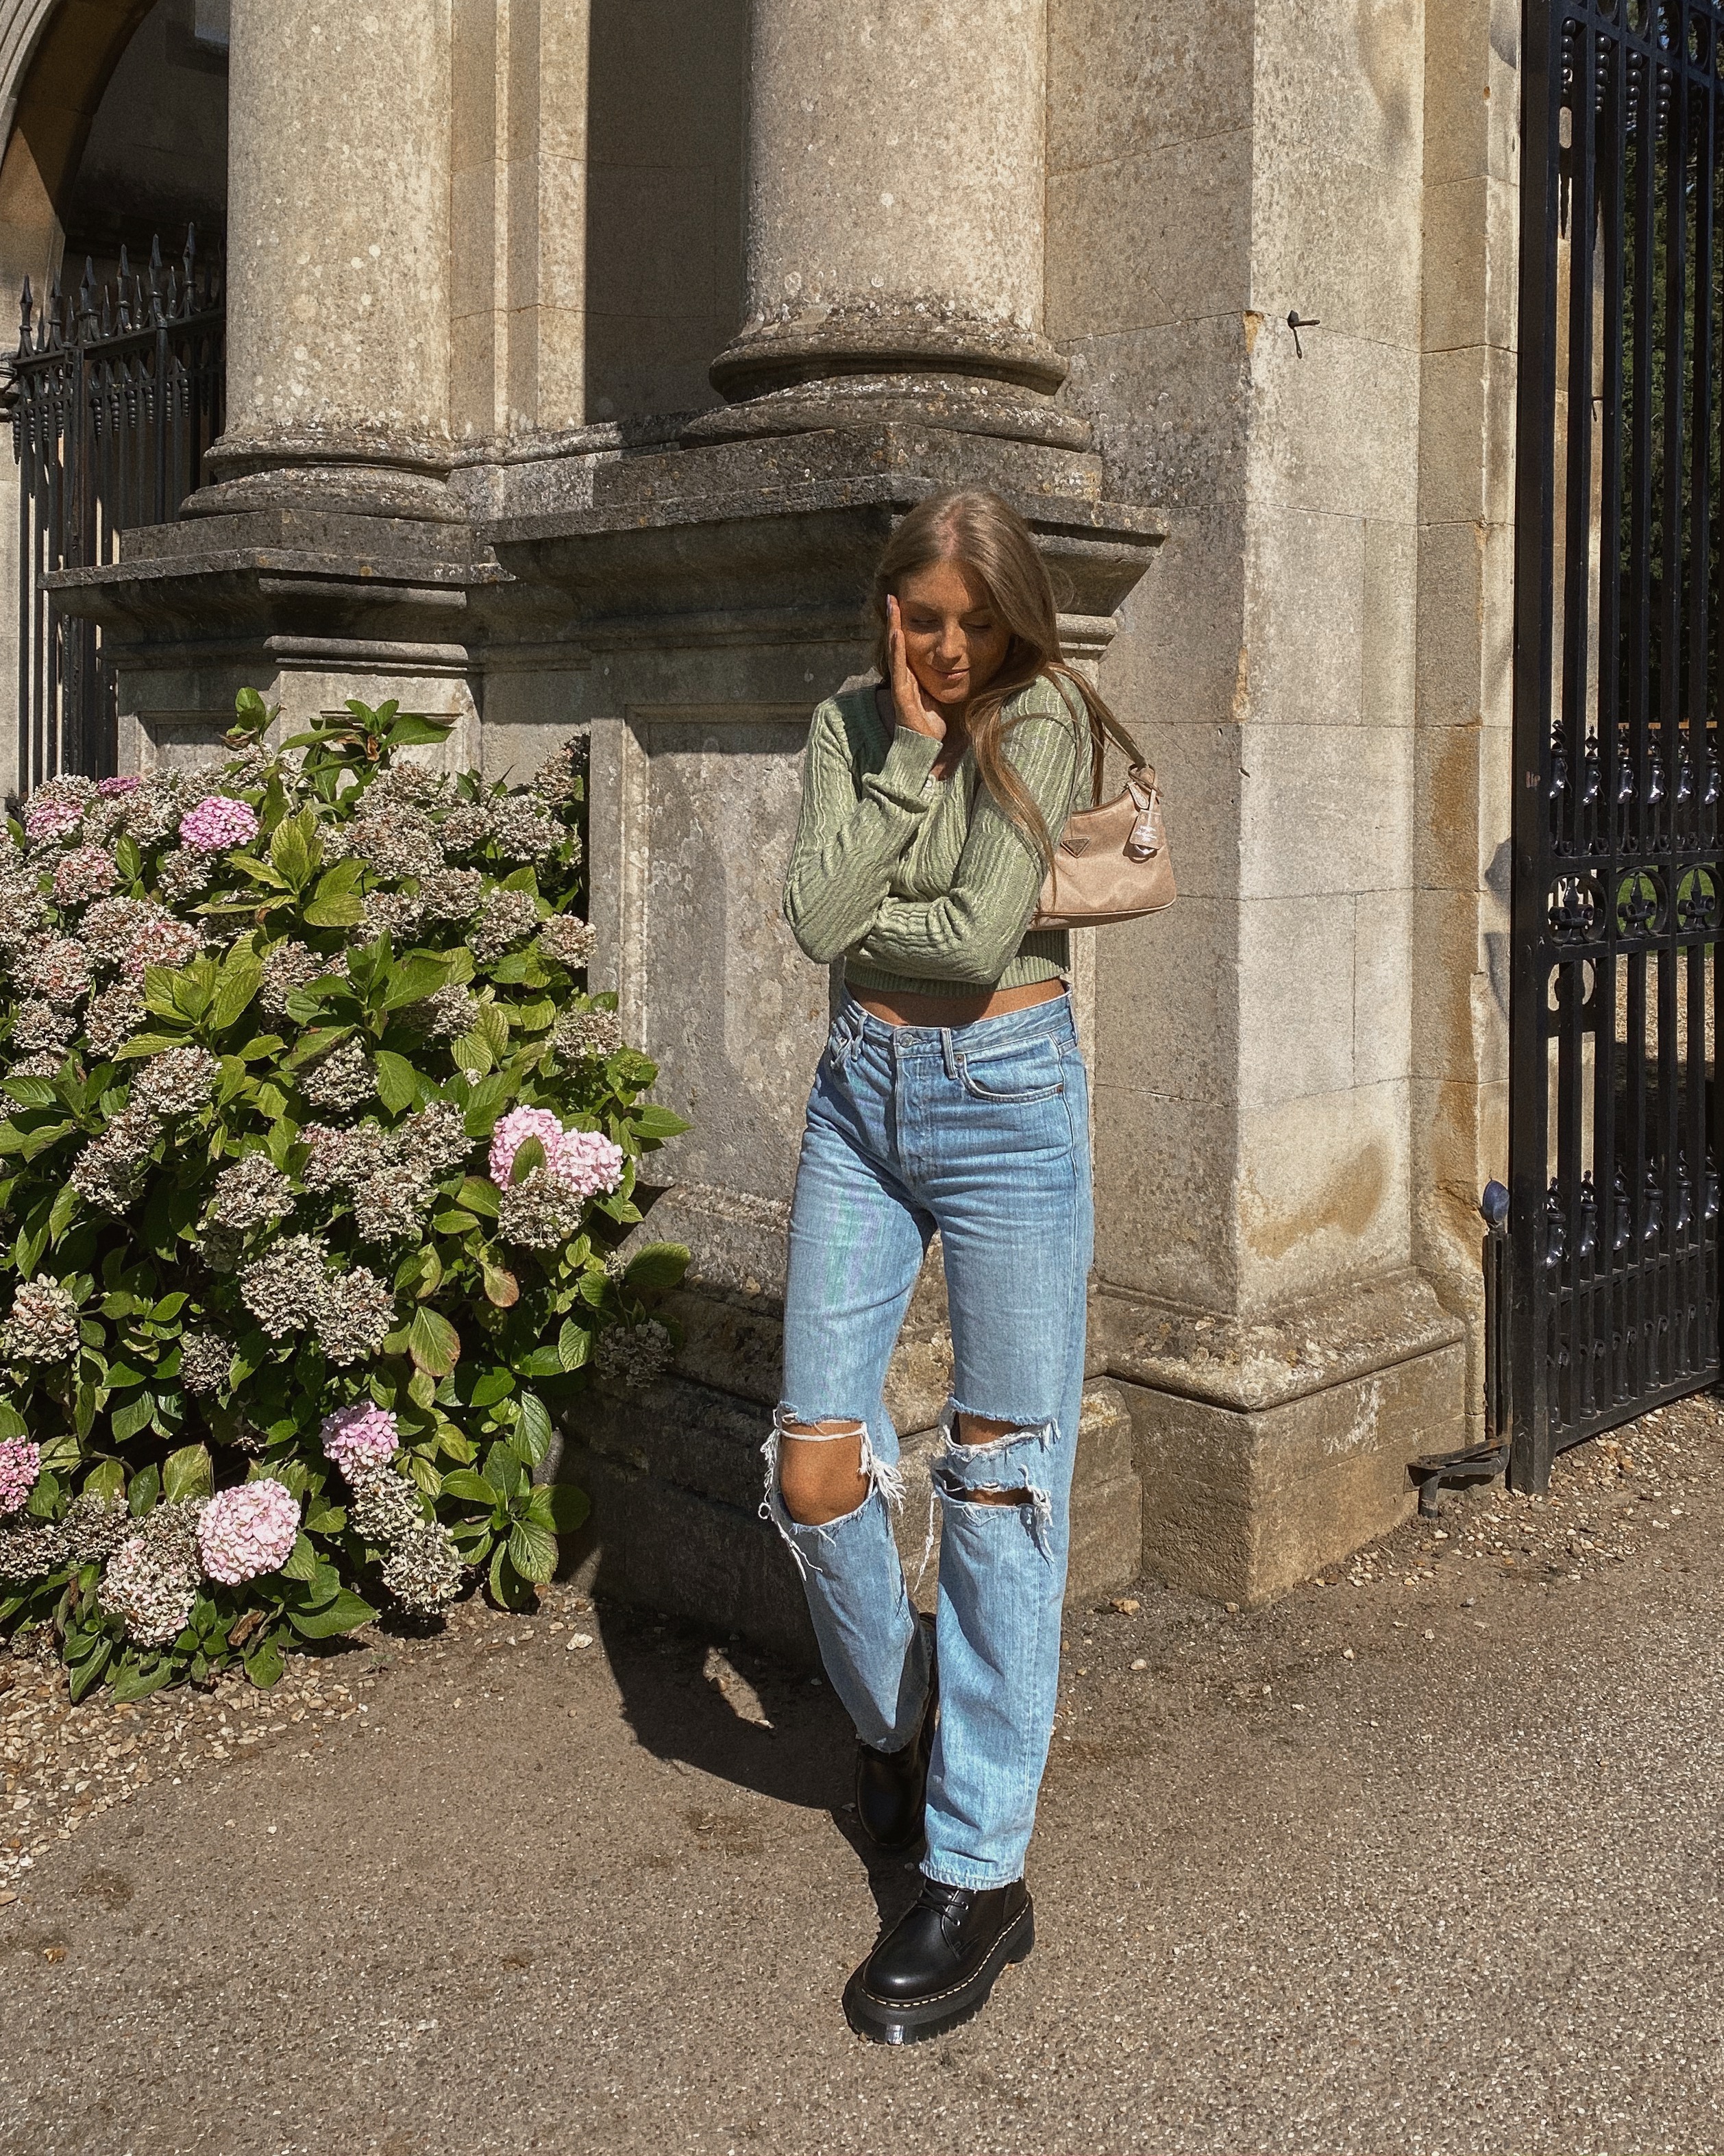 HOW TO STYLE A BELT / 3 Summer Outfit Ideas / Sinead Crowe 